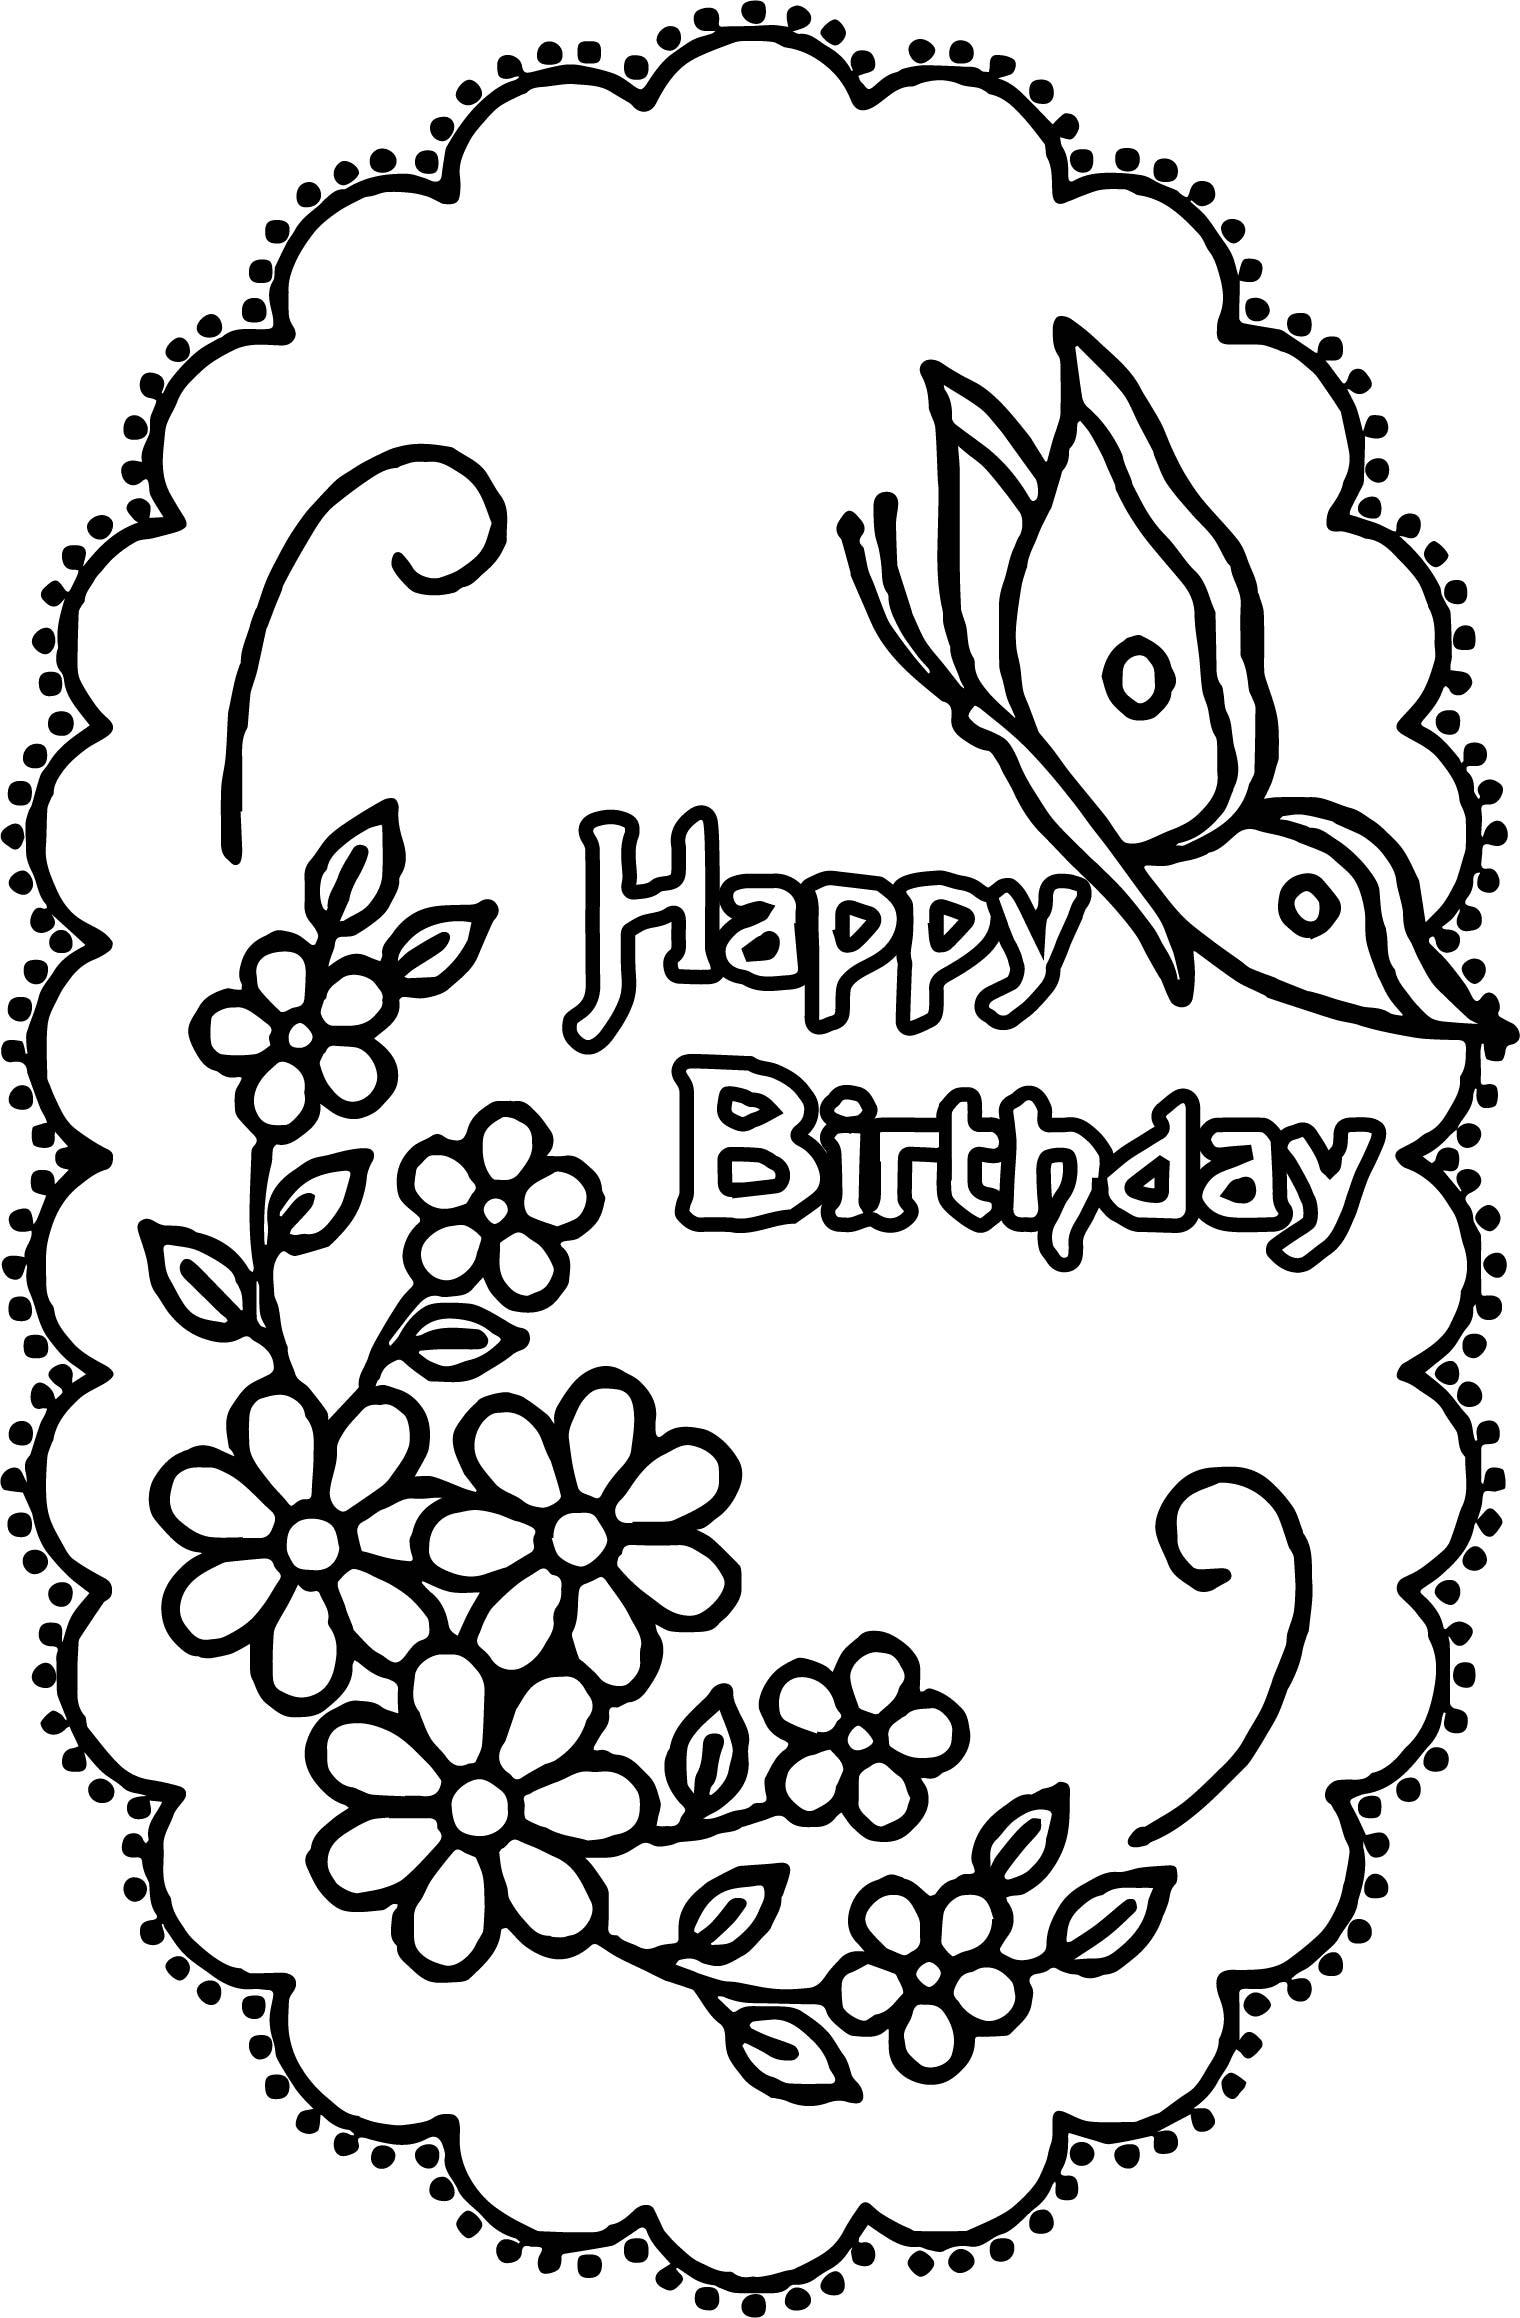 Happy Birthday Adult Coloring Pages At GetColorings Free 